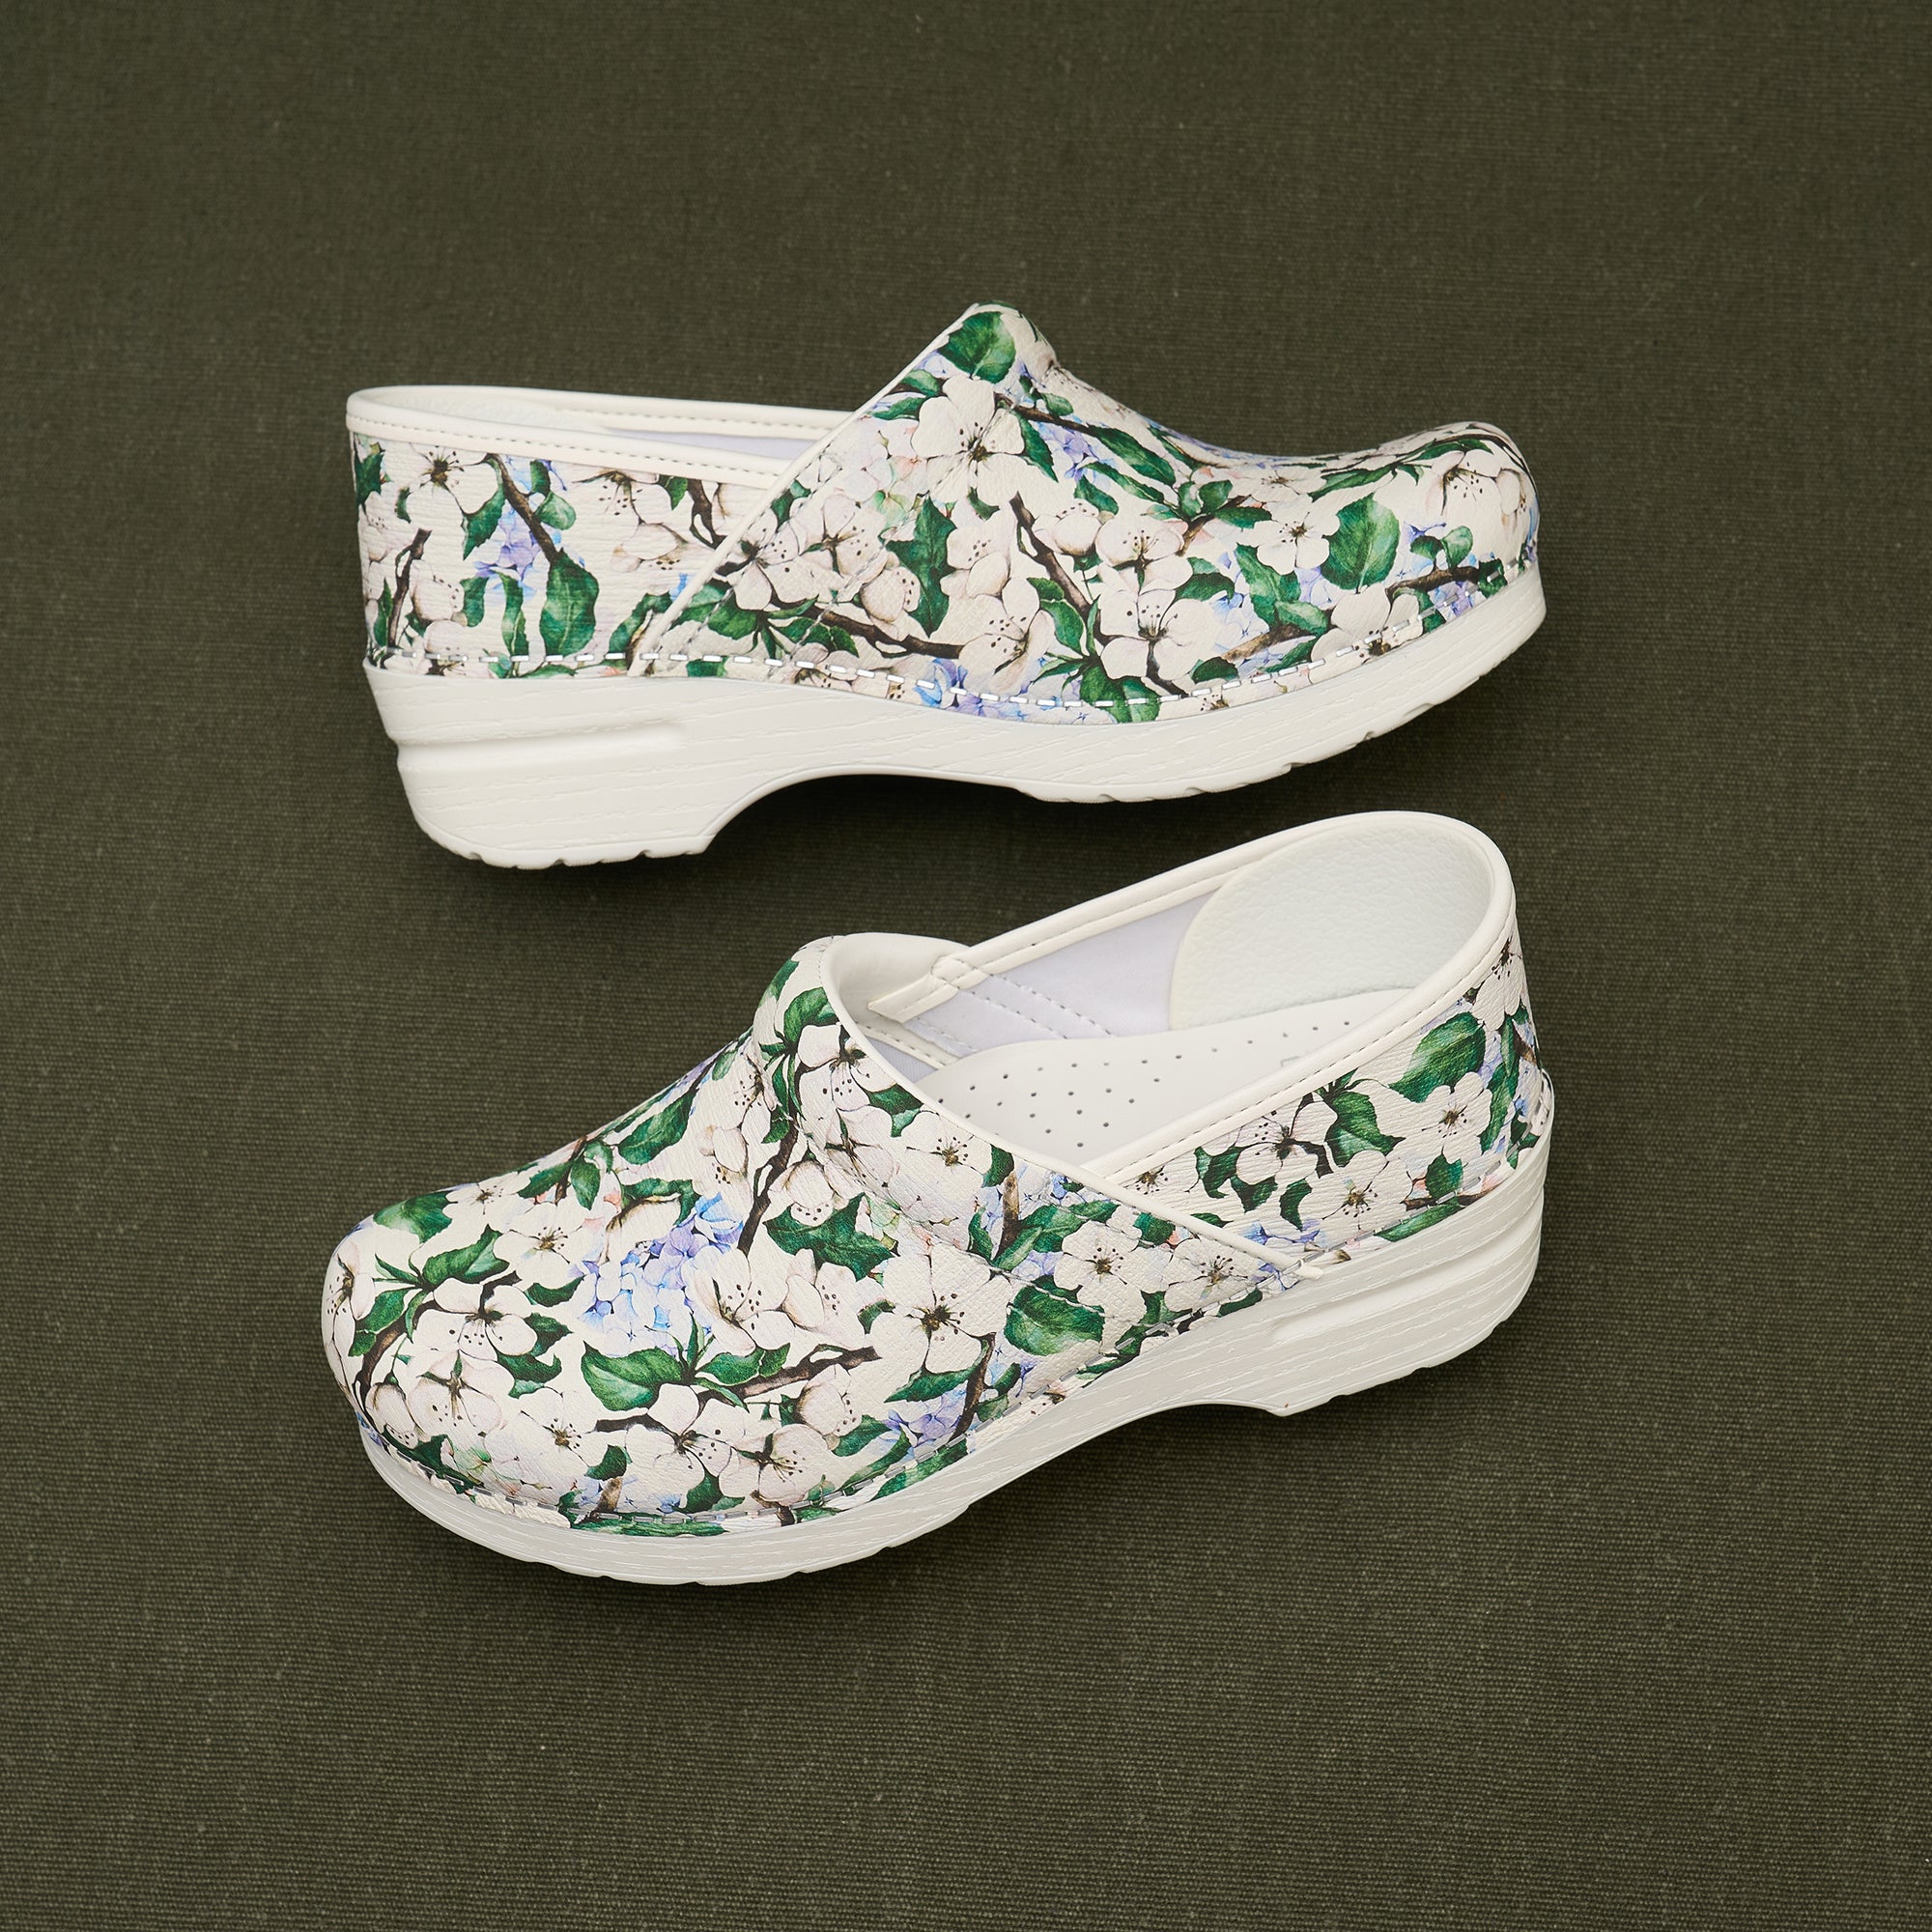 White clogs with a leaf and flower pattern shown against a dark background.